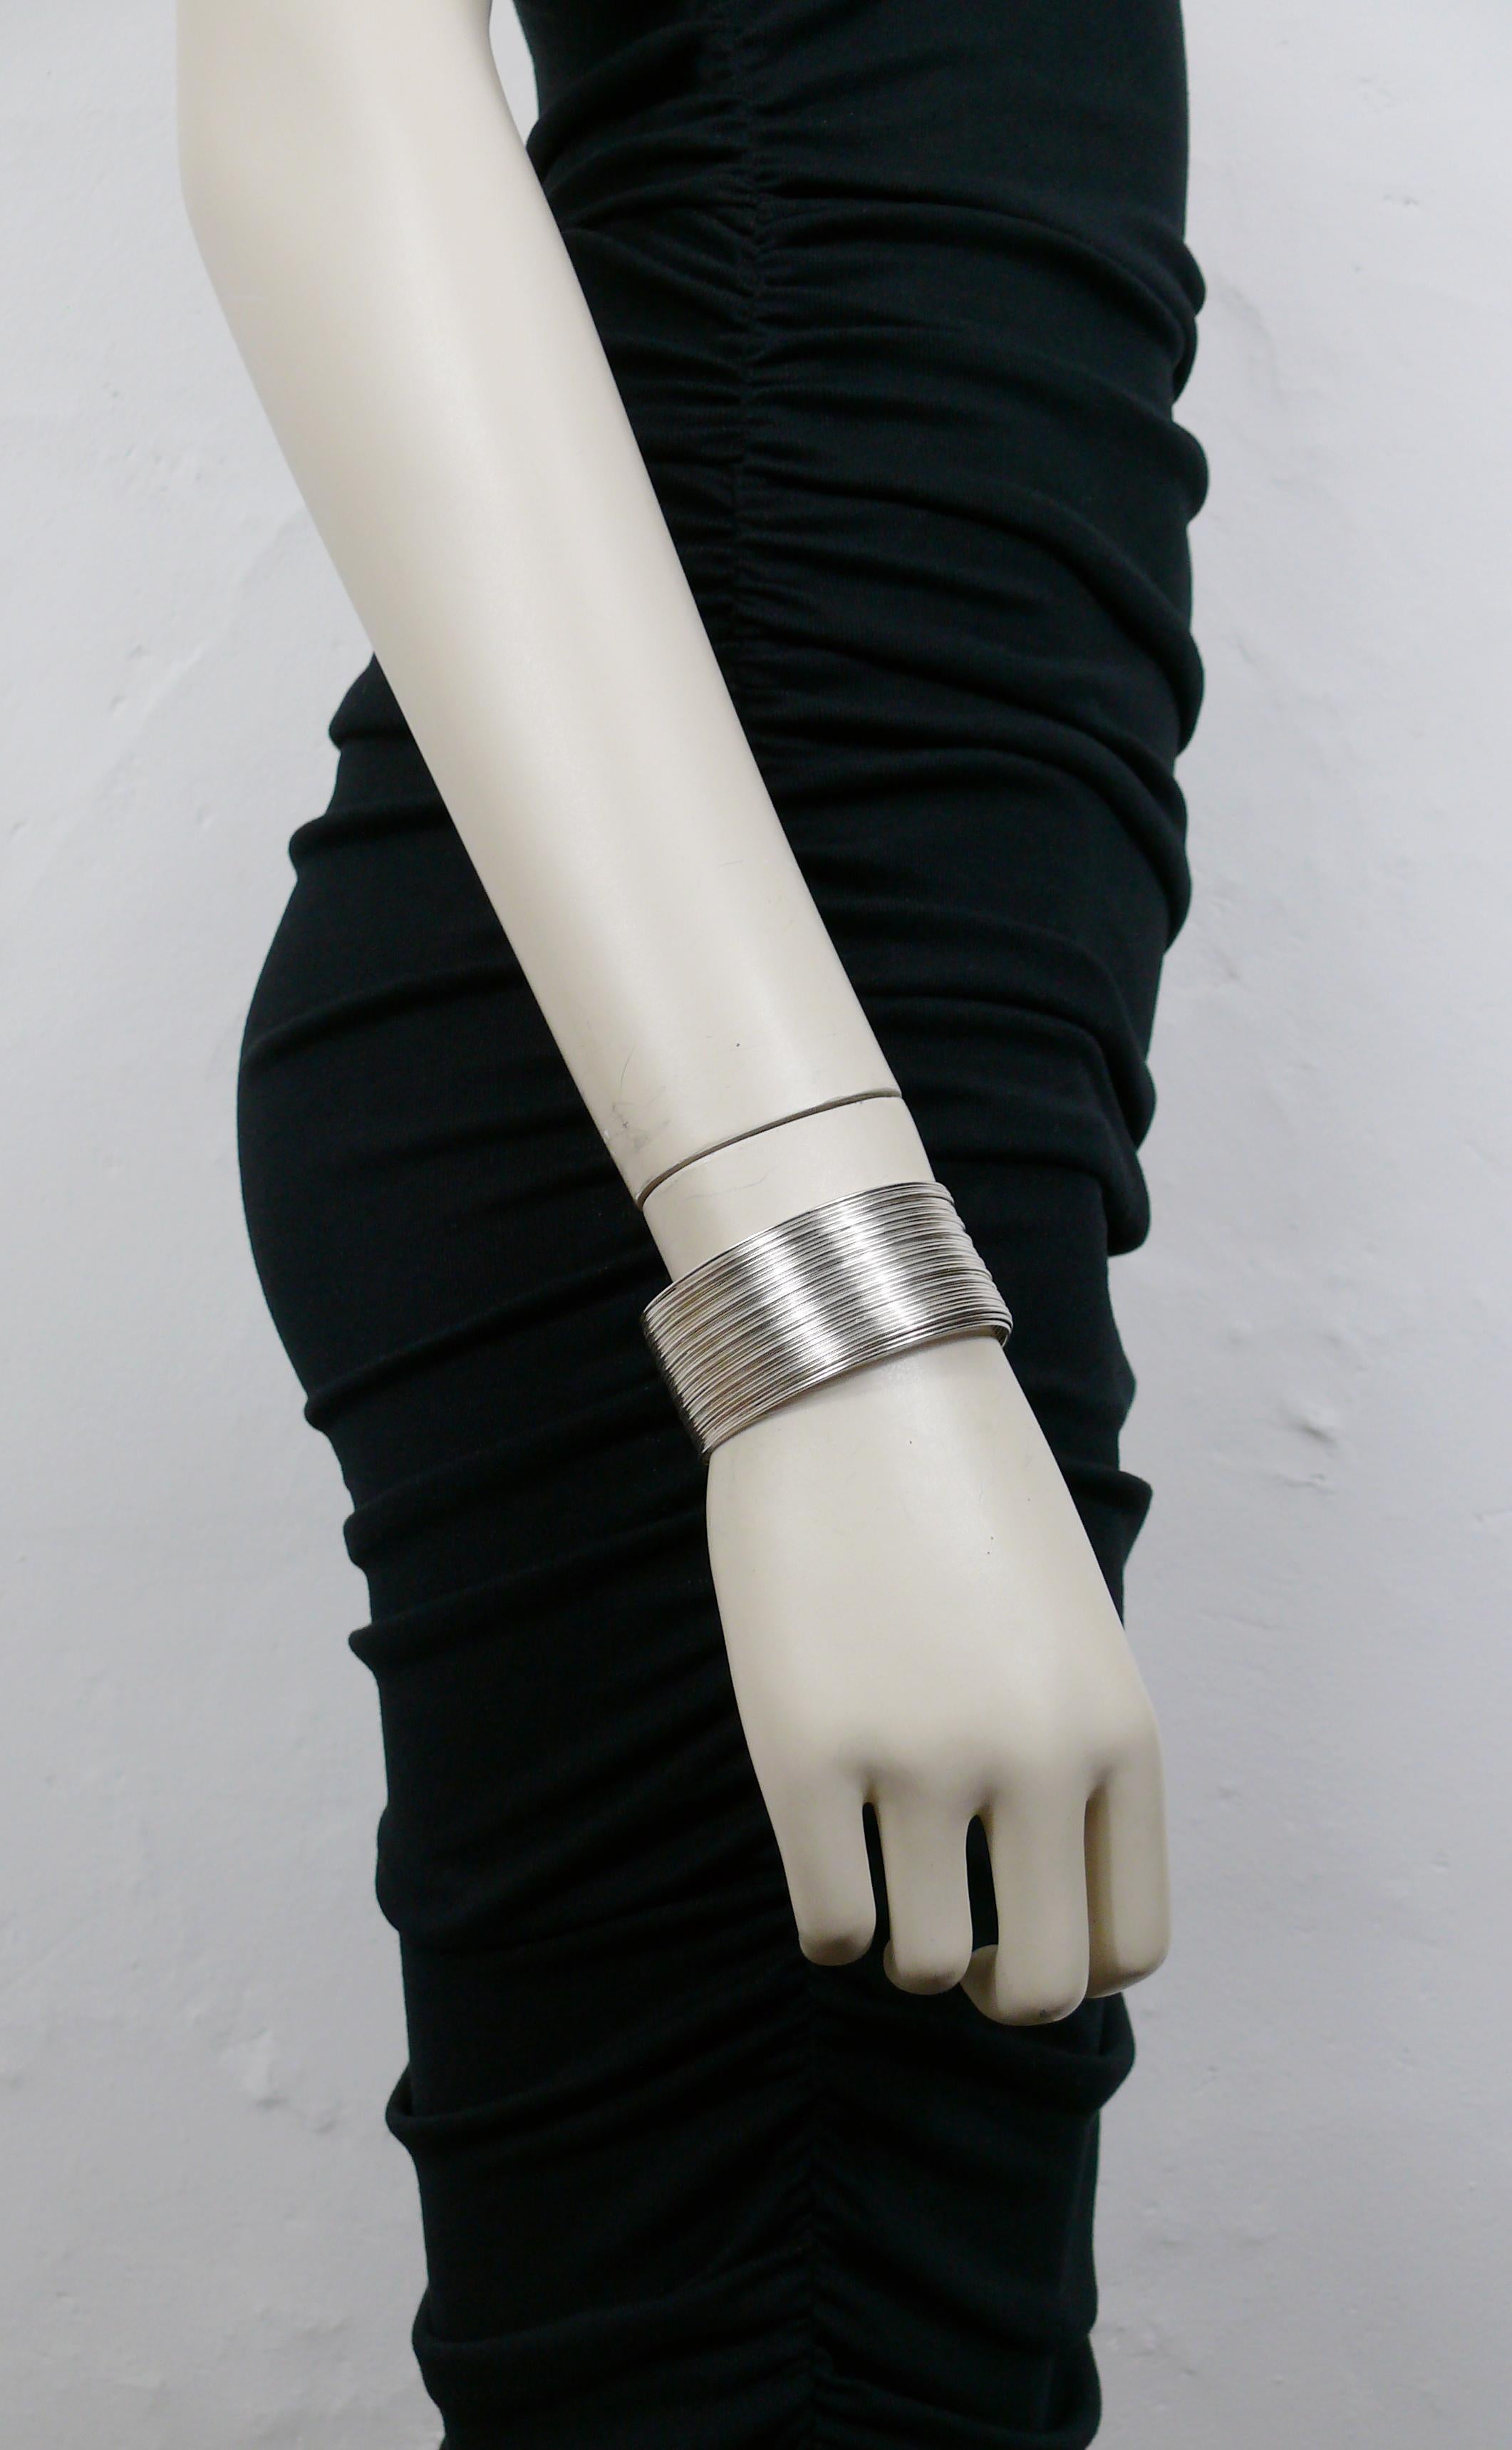 CHRISTIAN DIOR Boutique vintage silver toned wire cuff bracelet.

Silver tone metal hardware.

Marked CHRISTIAN DIOR Boutique.

Indicative measurements : inner circumference approx. 16.96 cm (6.68 inches) / width approx. 2.7 cm (1.06 inches) / total